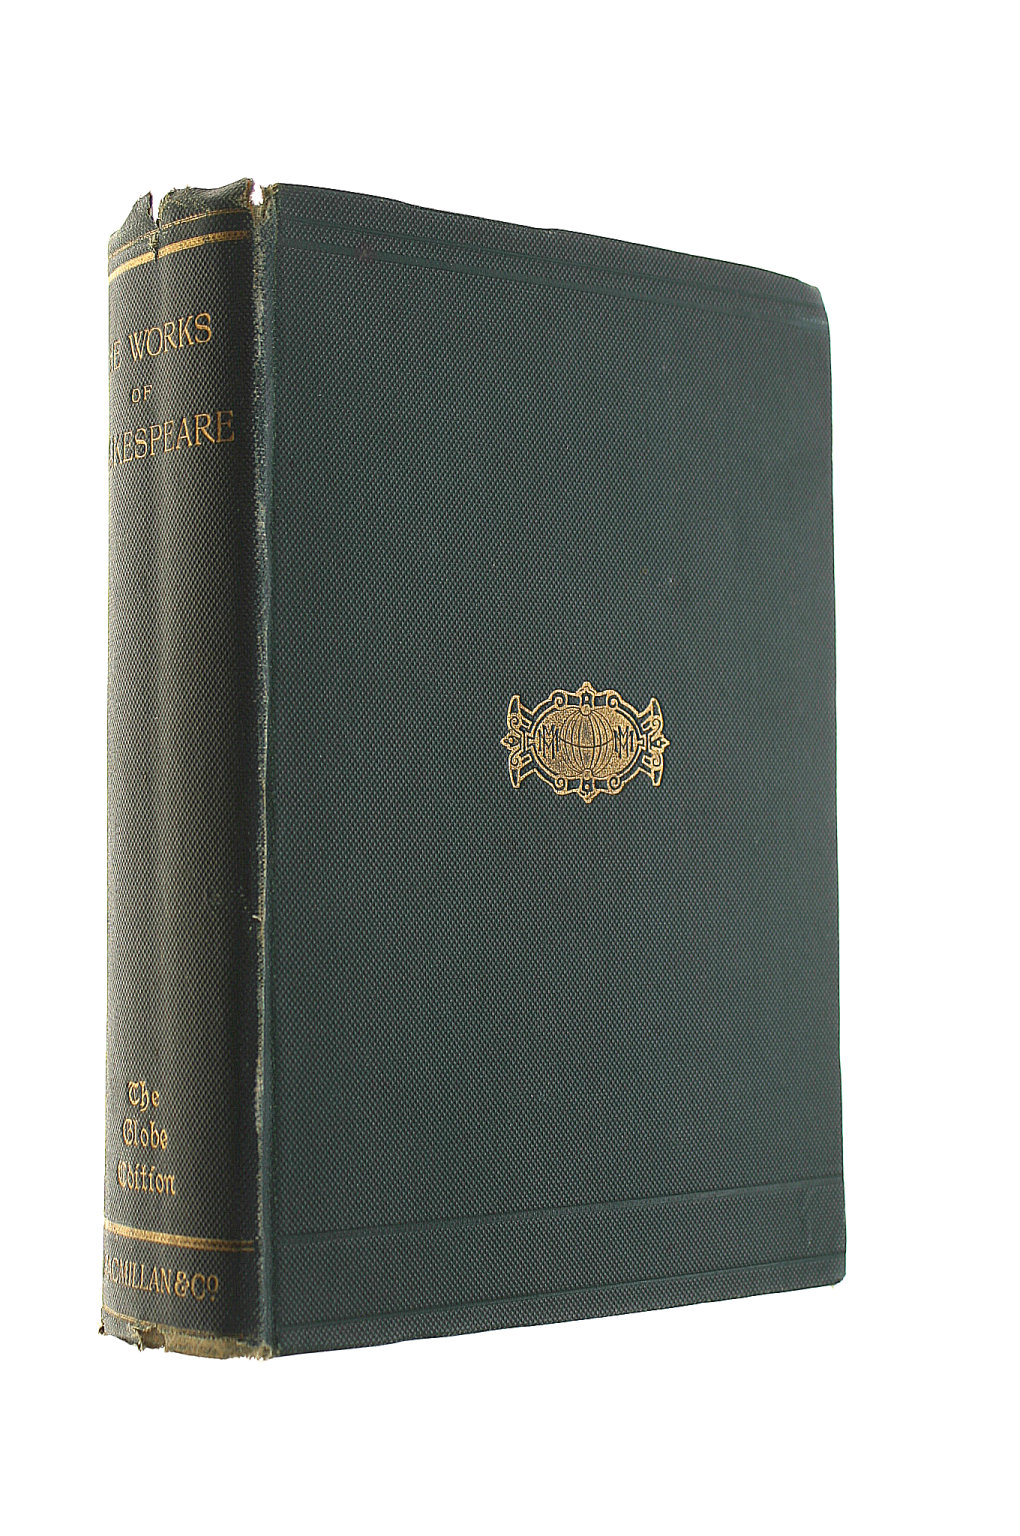 EDITED BY WILLIAM GEORGE CLARK AND WILLIAM ALDIS WRIGHT - The Works Of William Shakespeare The Globe Edition